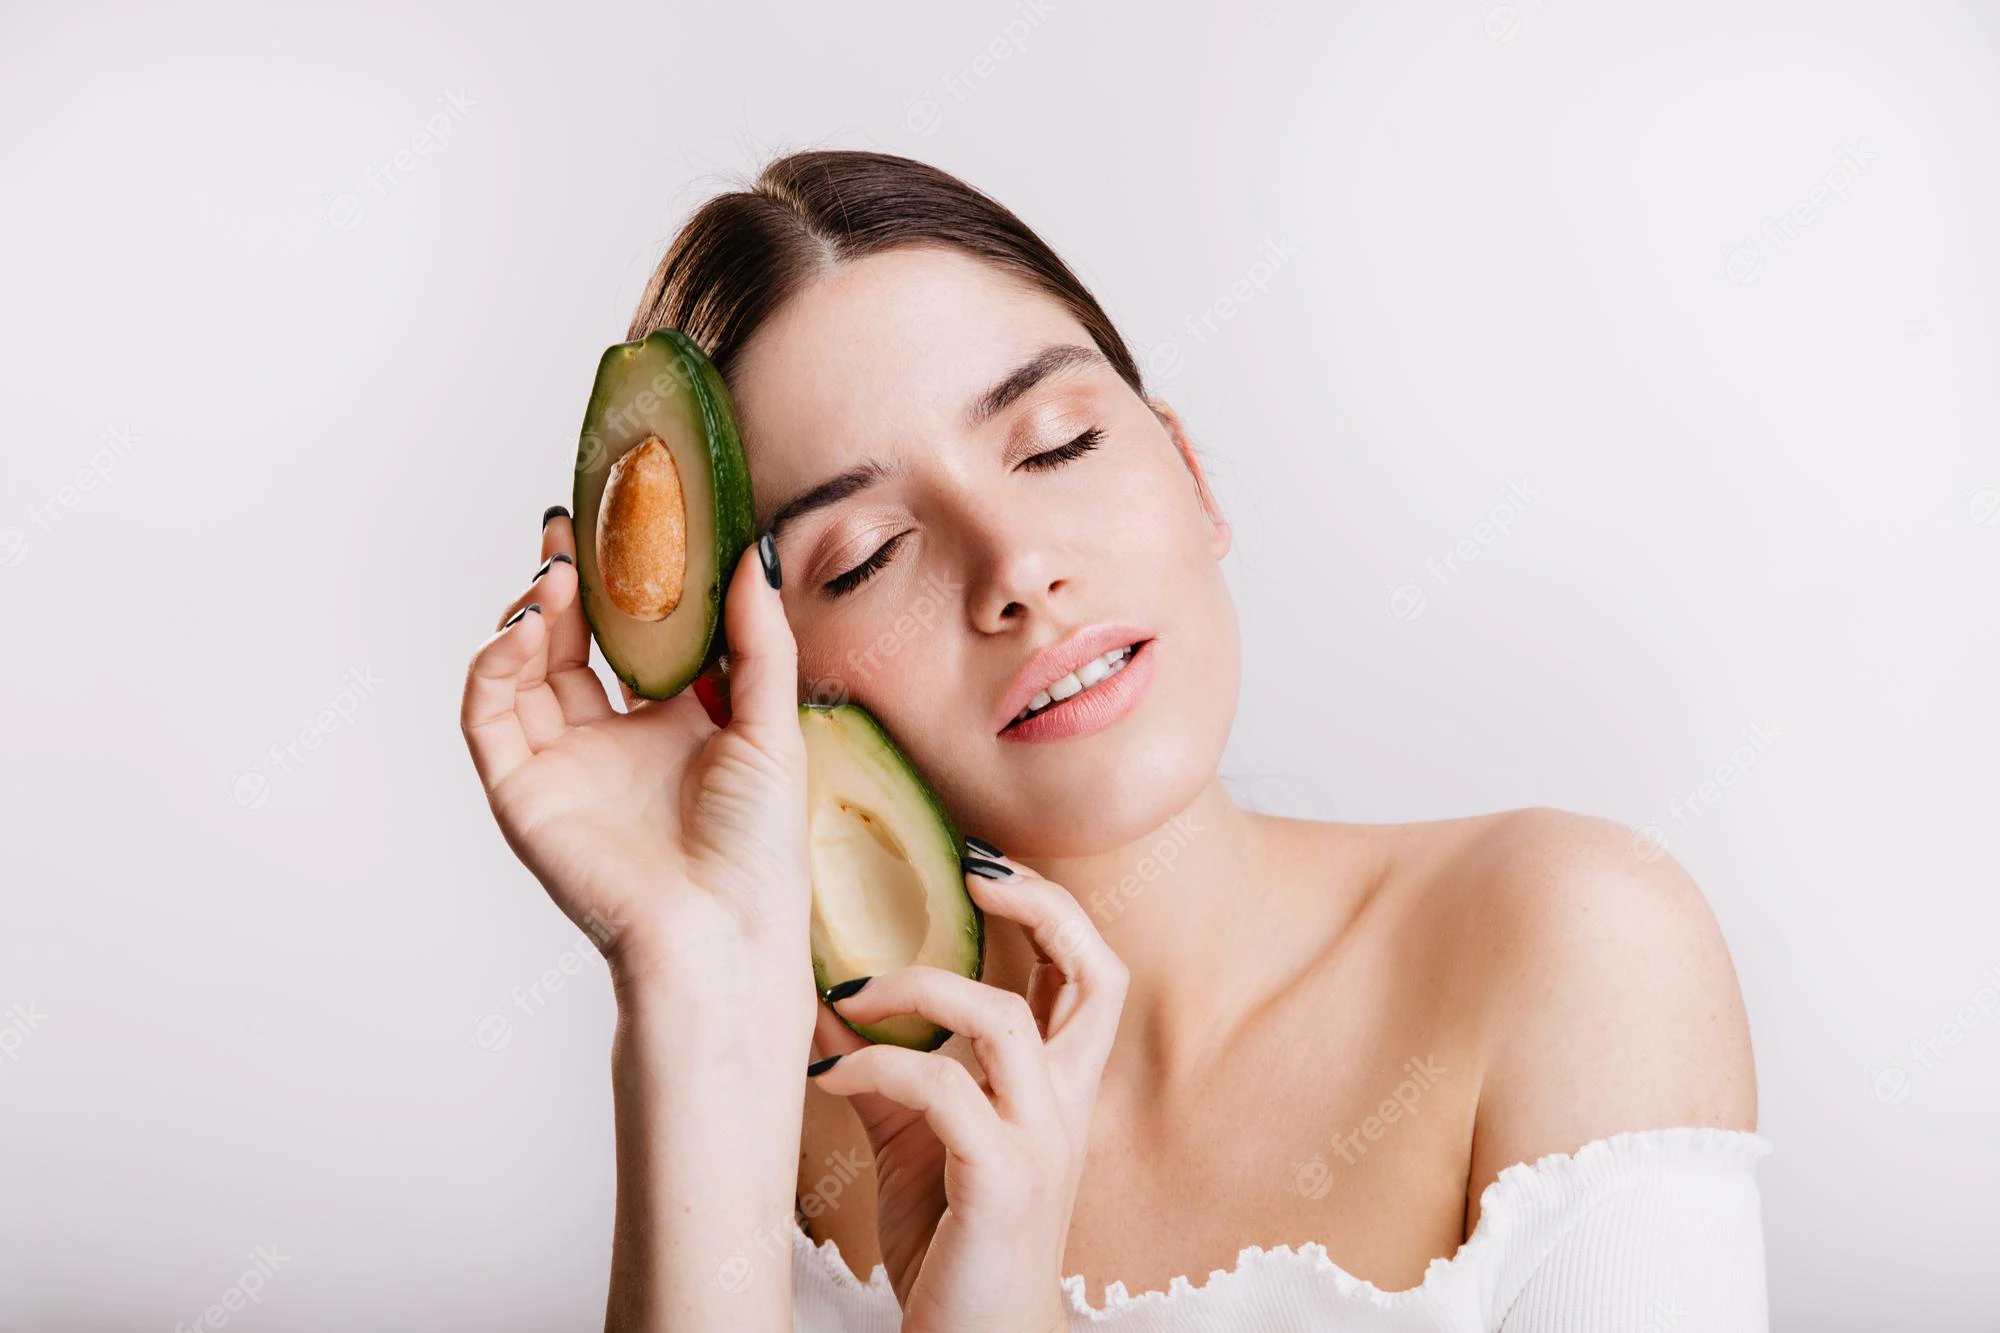 Avocado Skin: The Natural Solution to Radiant and Youthful Complexion You've Been Searching For